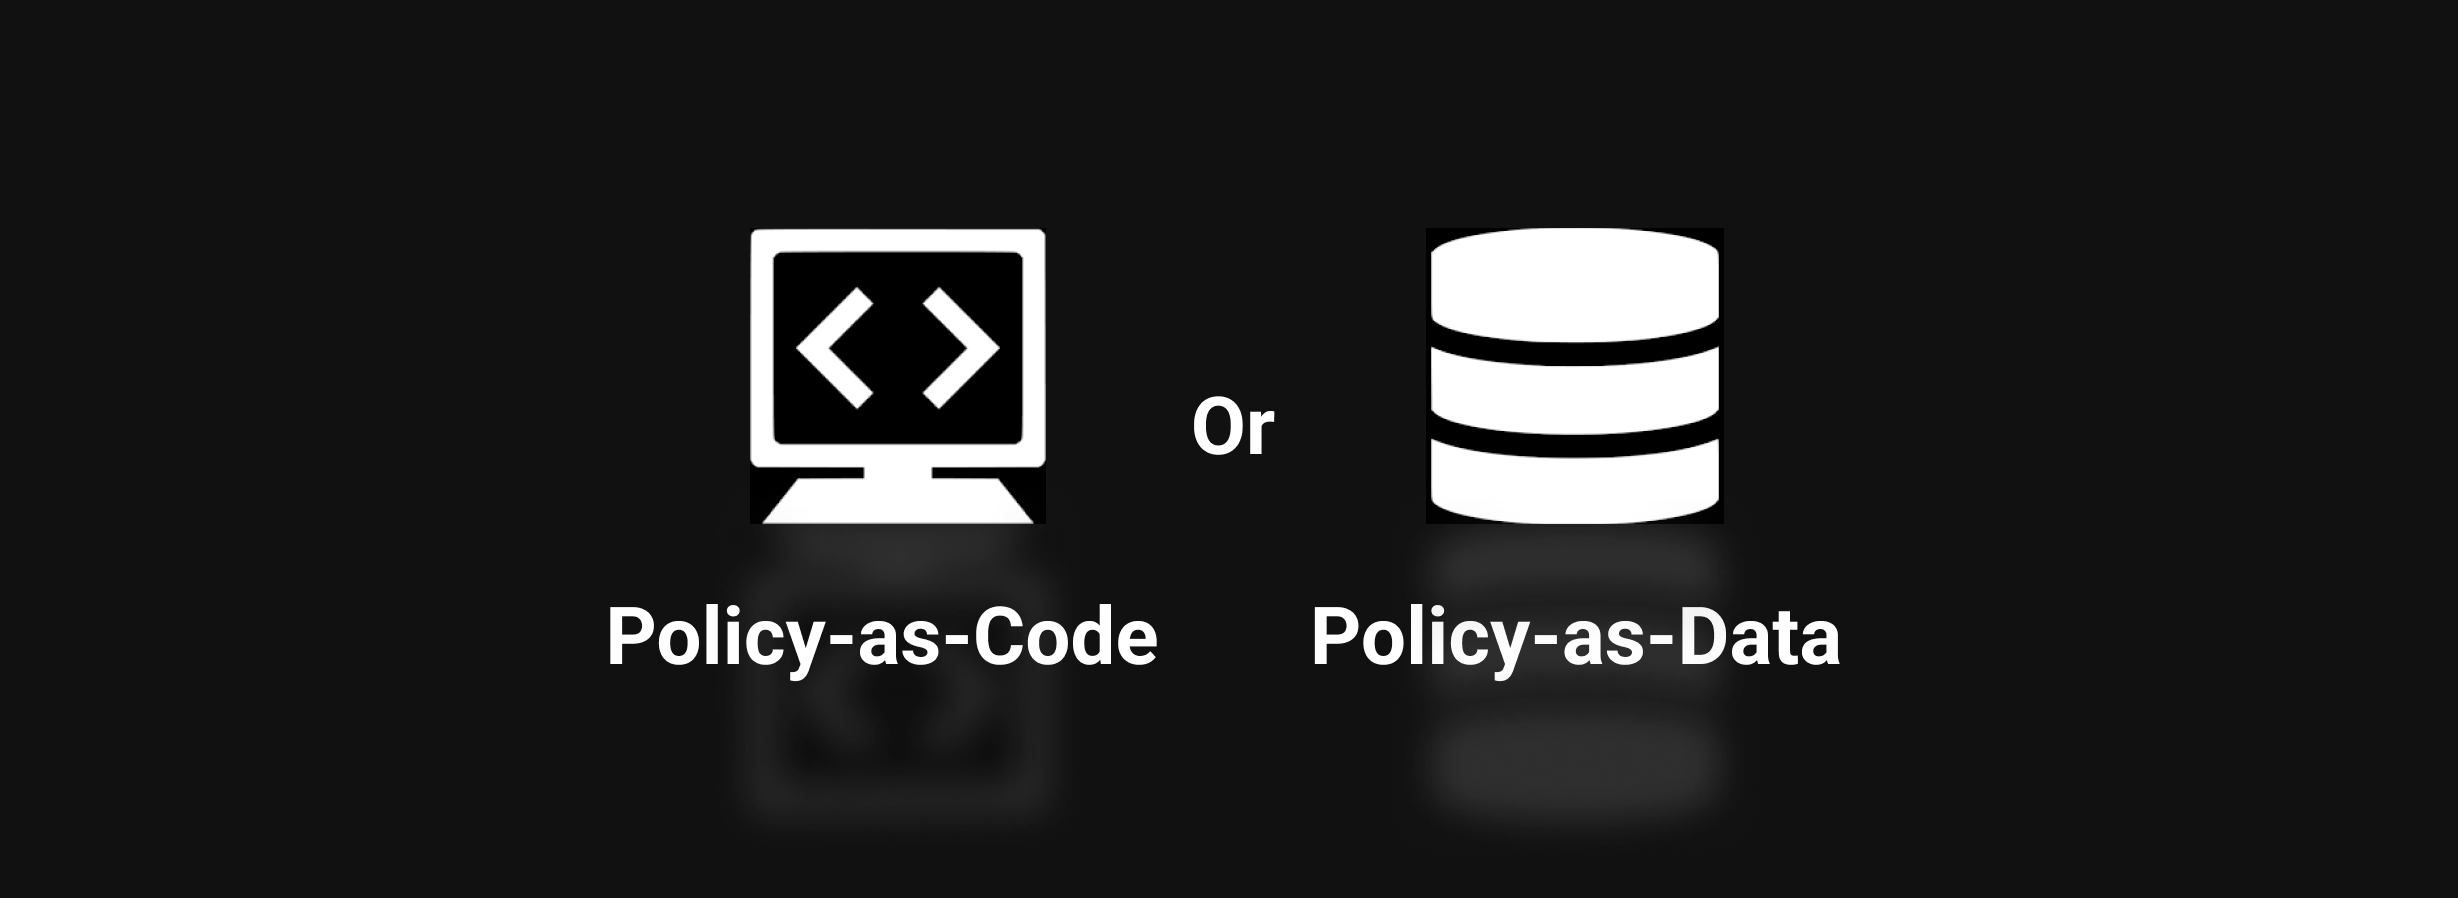 policy-as-code-or-policy-as-data